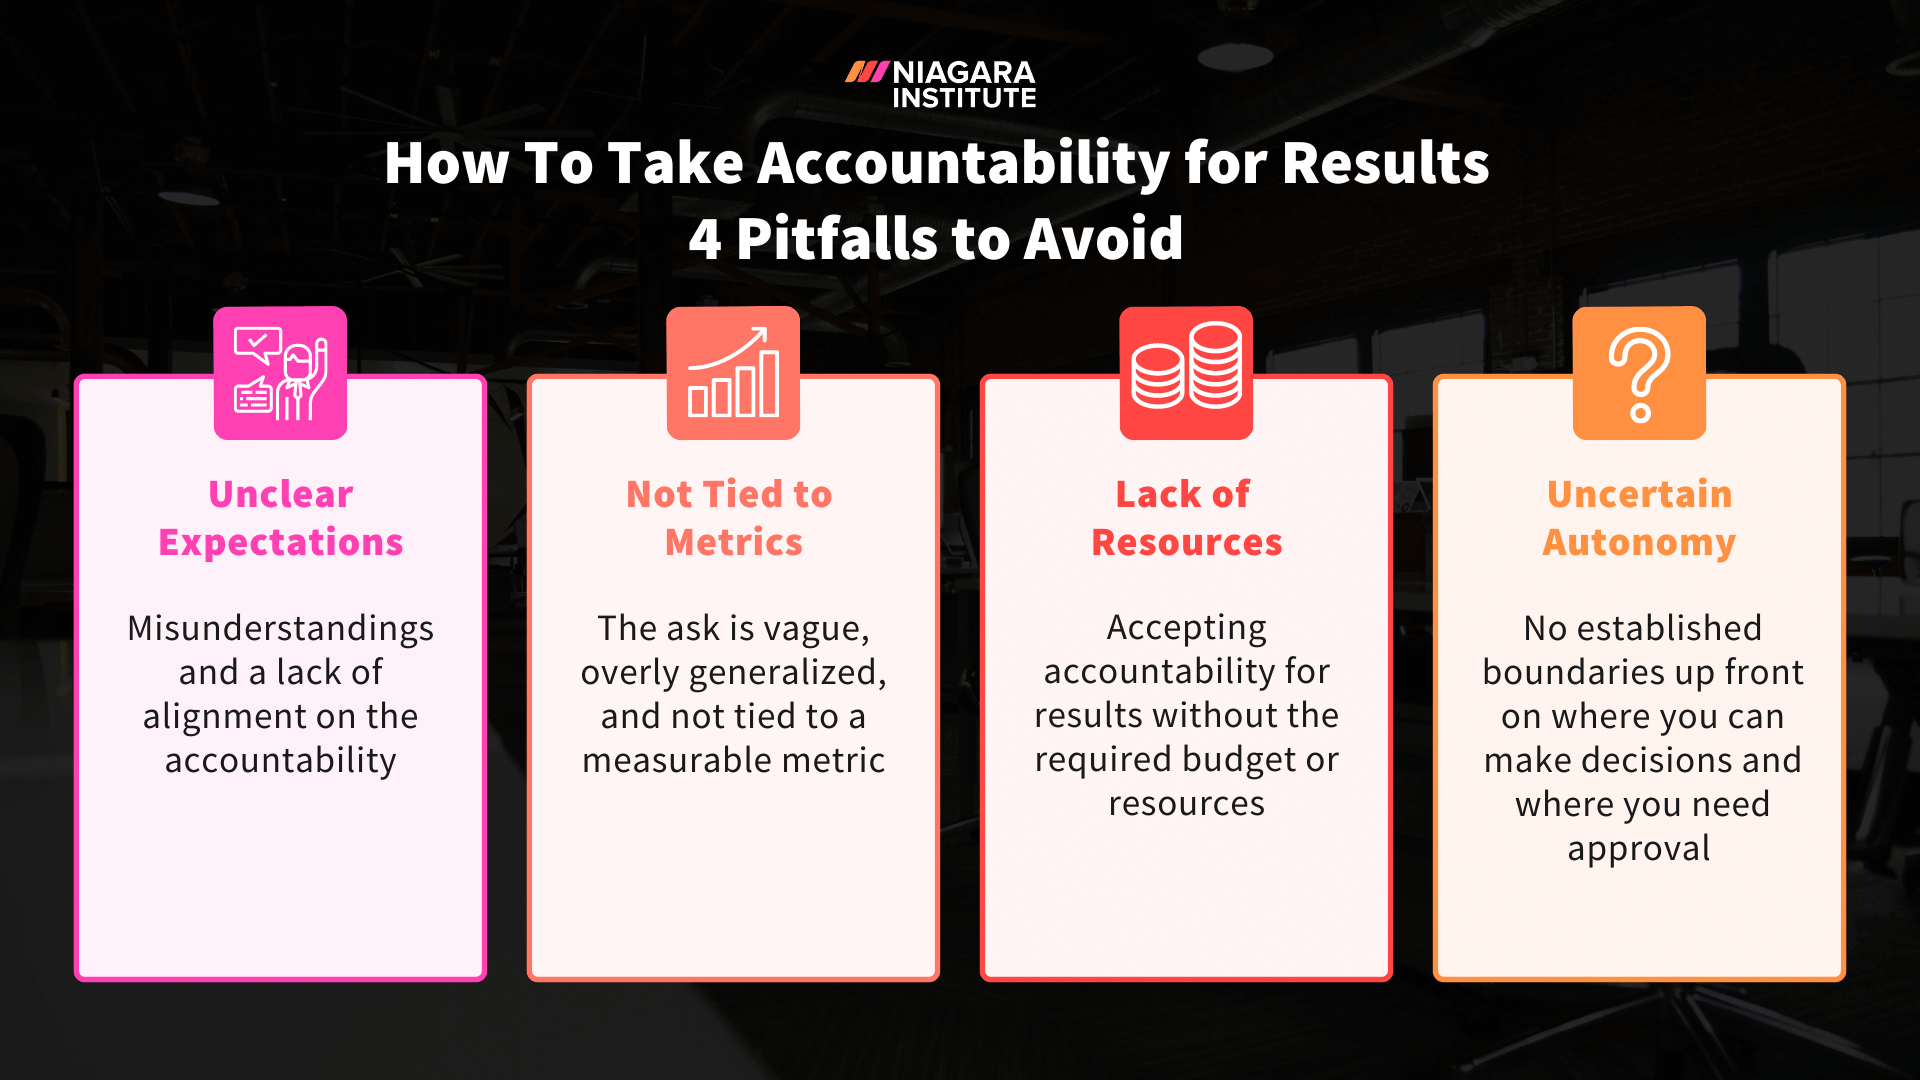 How To Take Accountability for Results 1 - Niagara Institute (1)